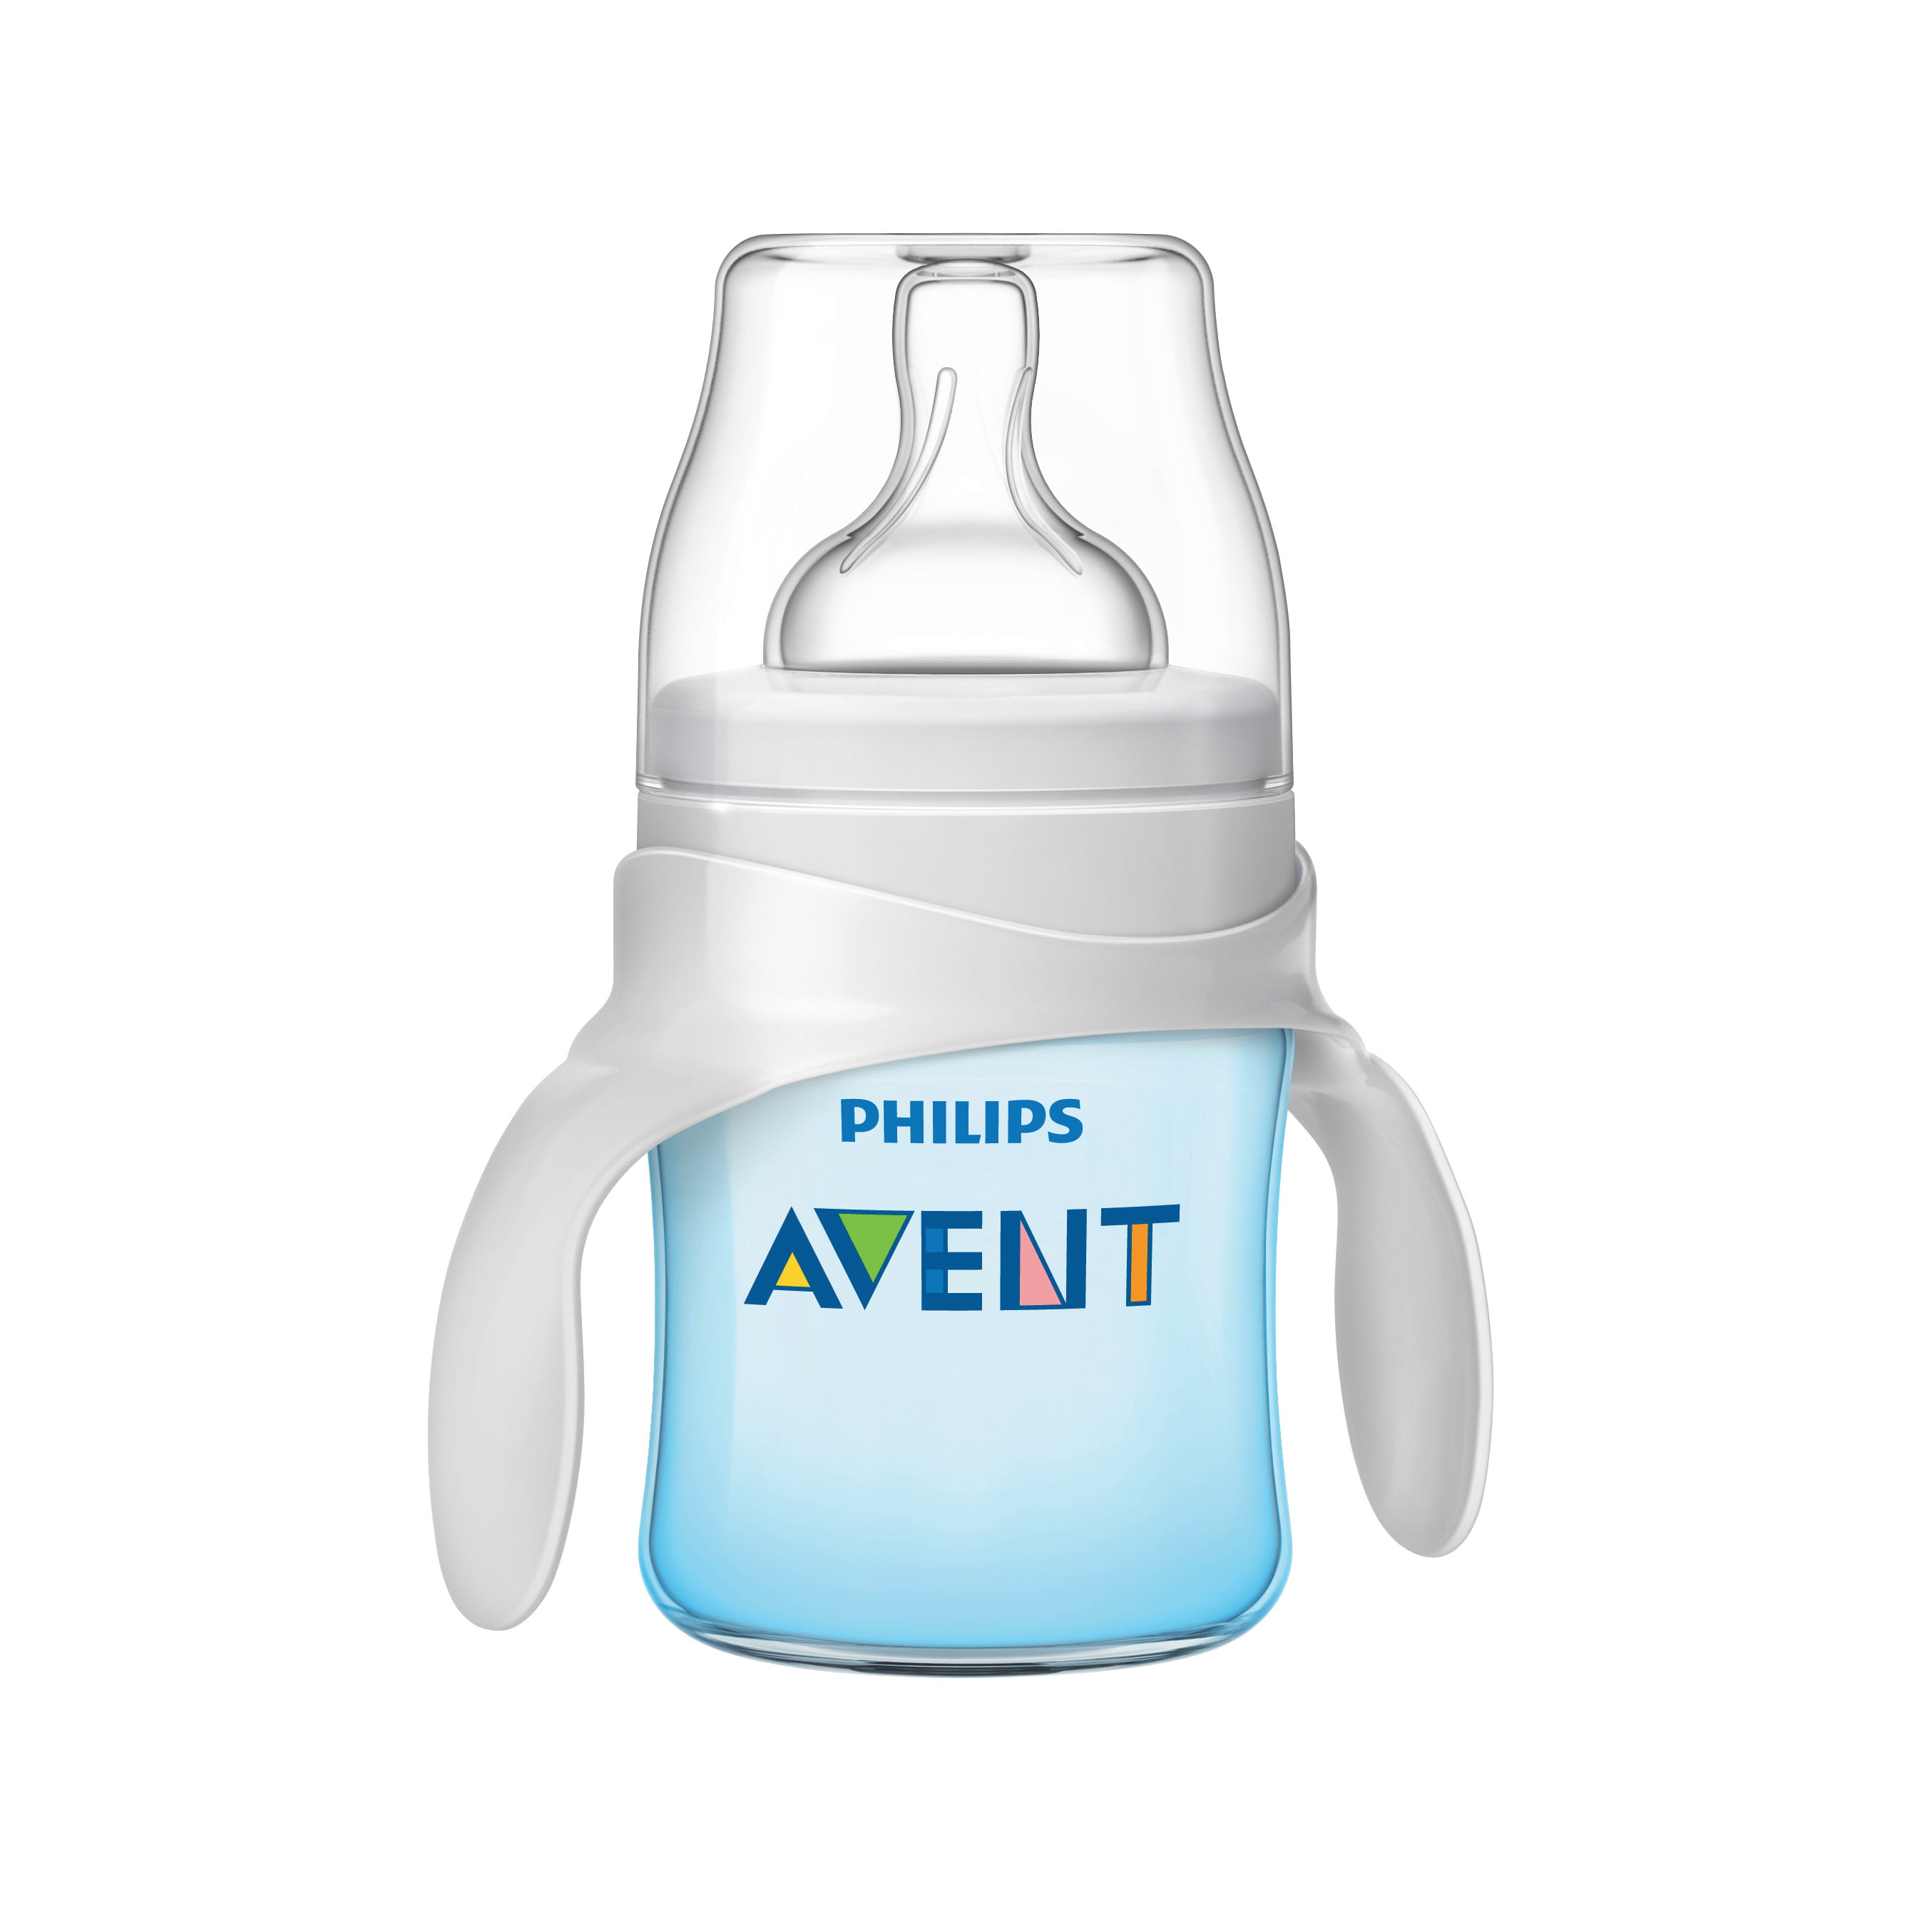 sippy cups to transition from bottle